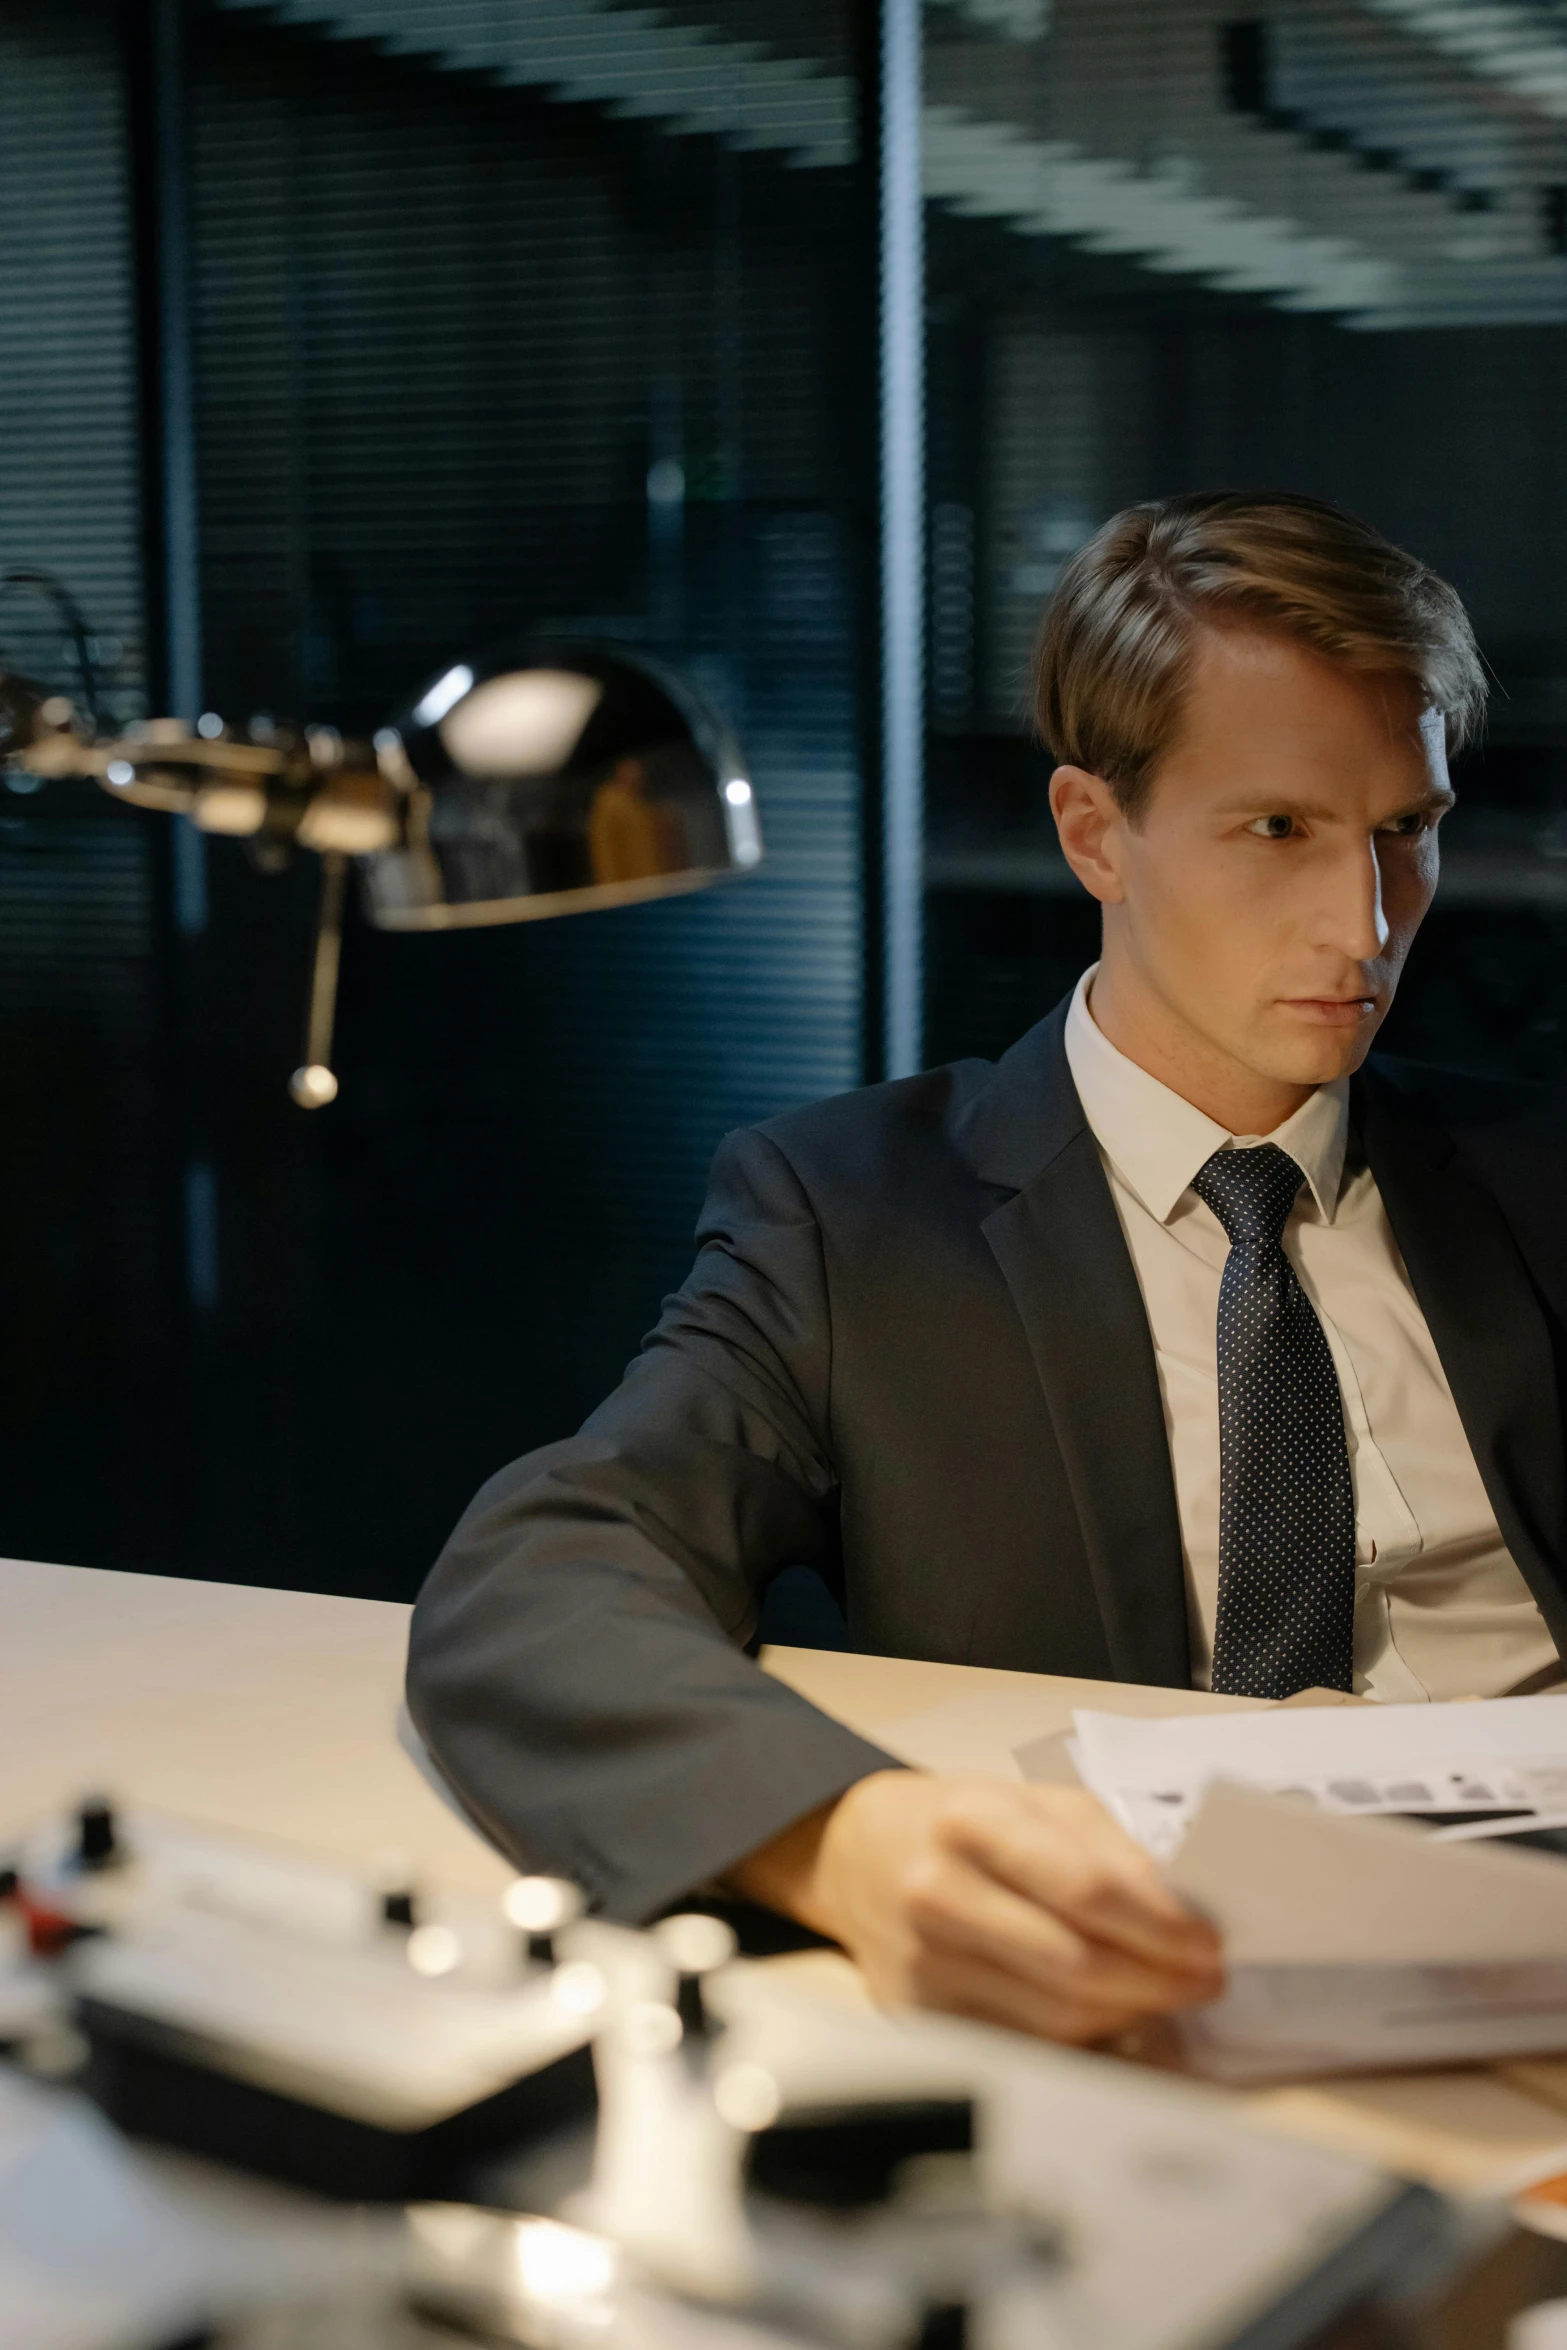 a man in business attire seated at a desk looking at paperwork